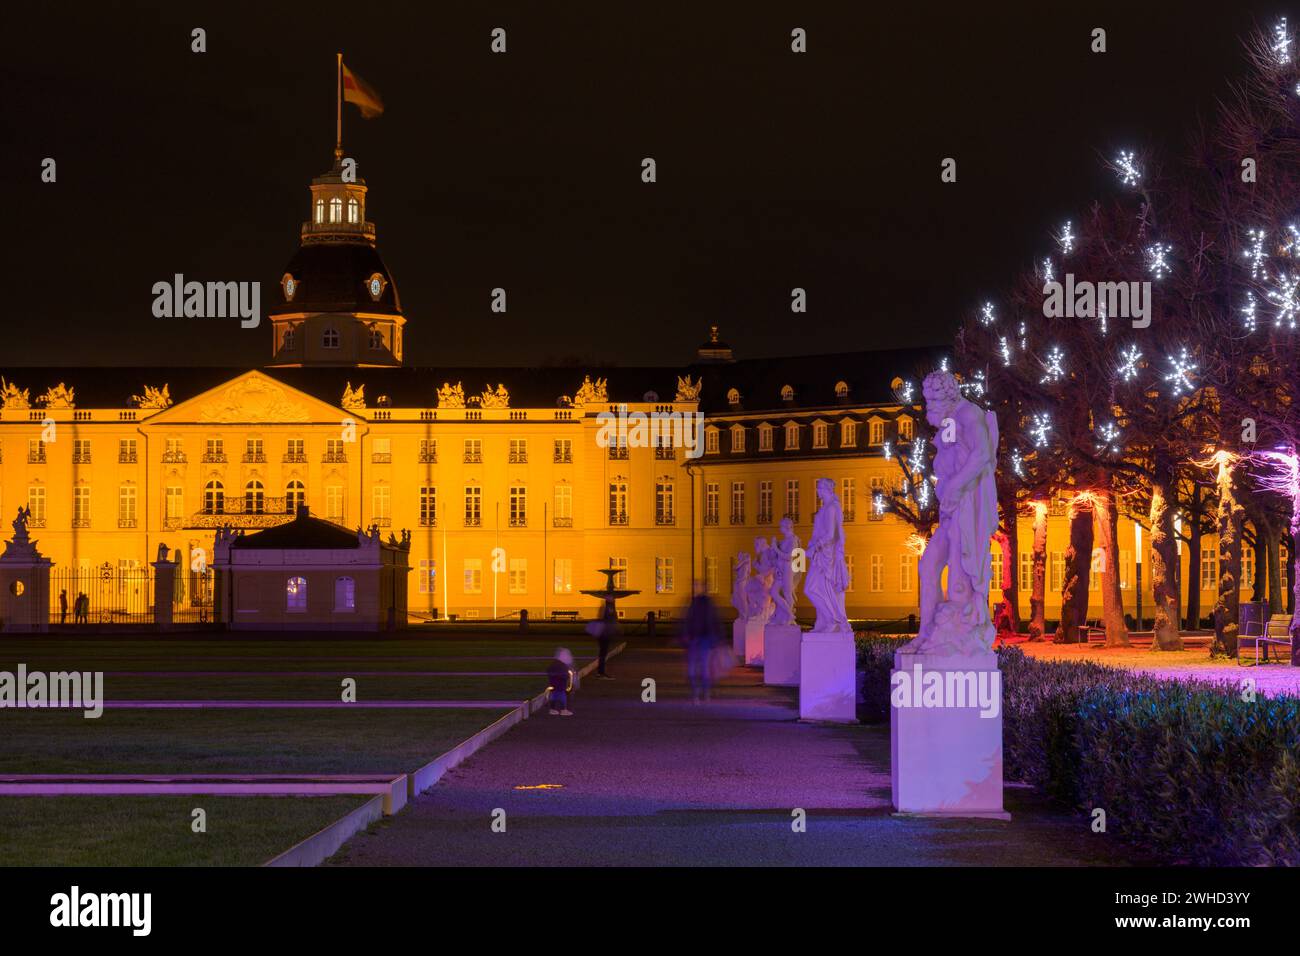 Germany, Baden-Württemberg, Karlsruhe, the castle with Christmas lights Stock Photo